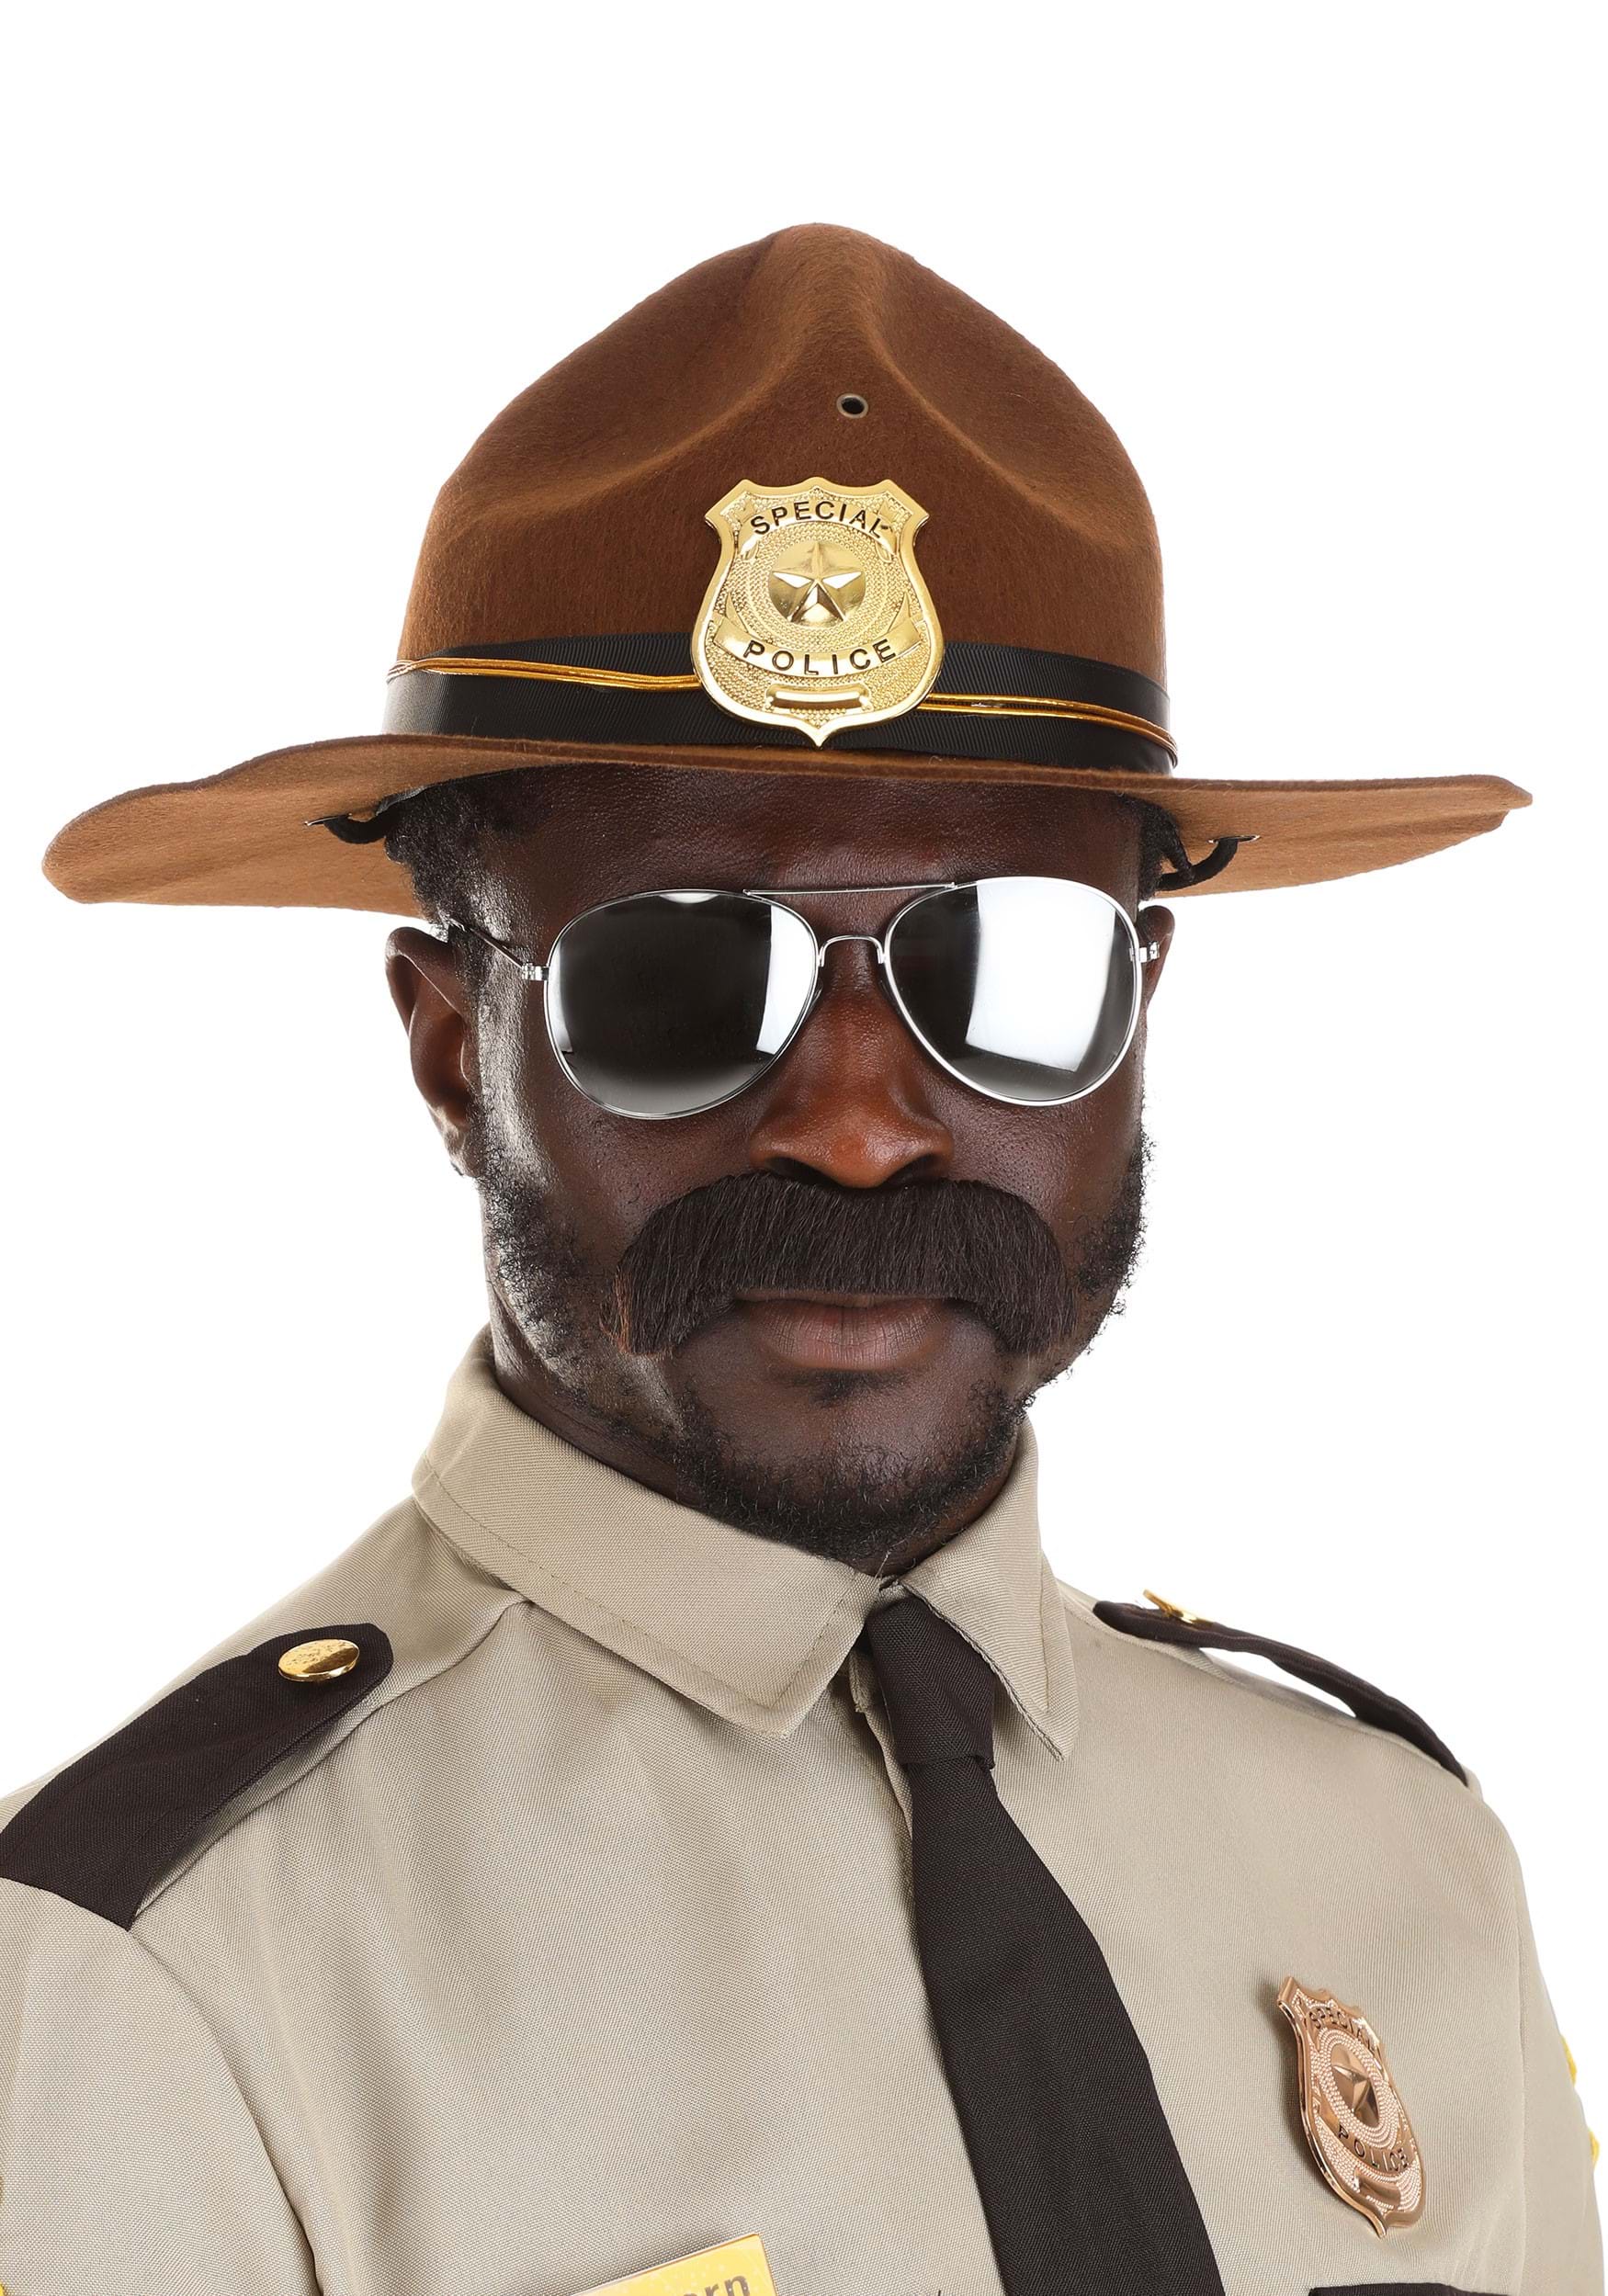 Police Detective Kit Hat Badge Glasses Moustache Adult Cosplay Halloween Costume for sale online 